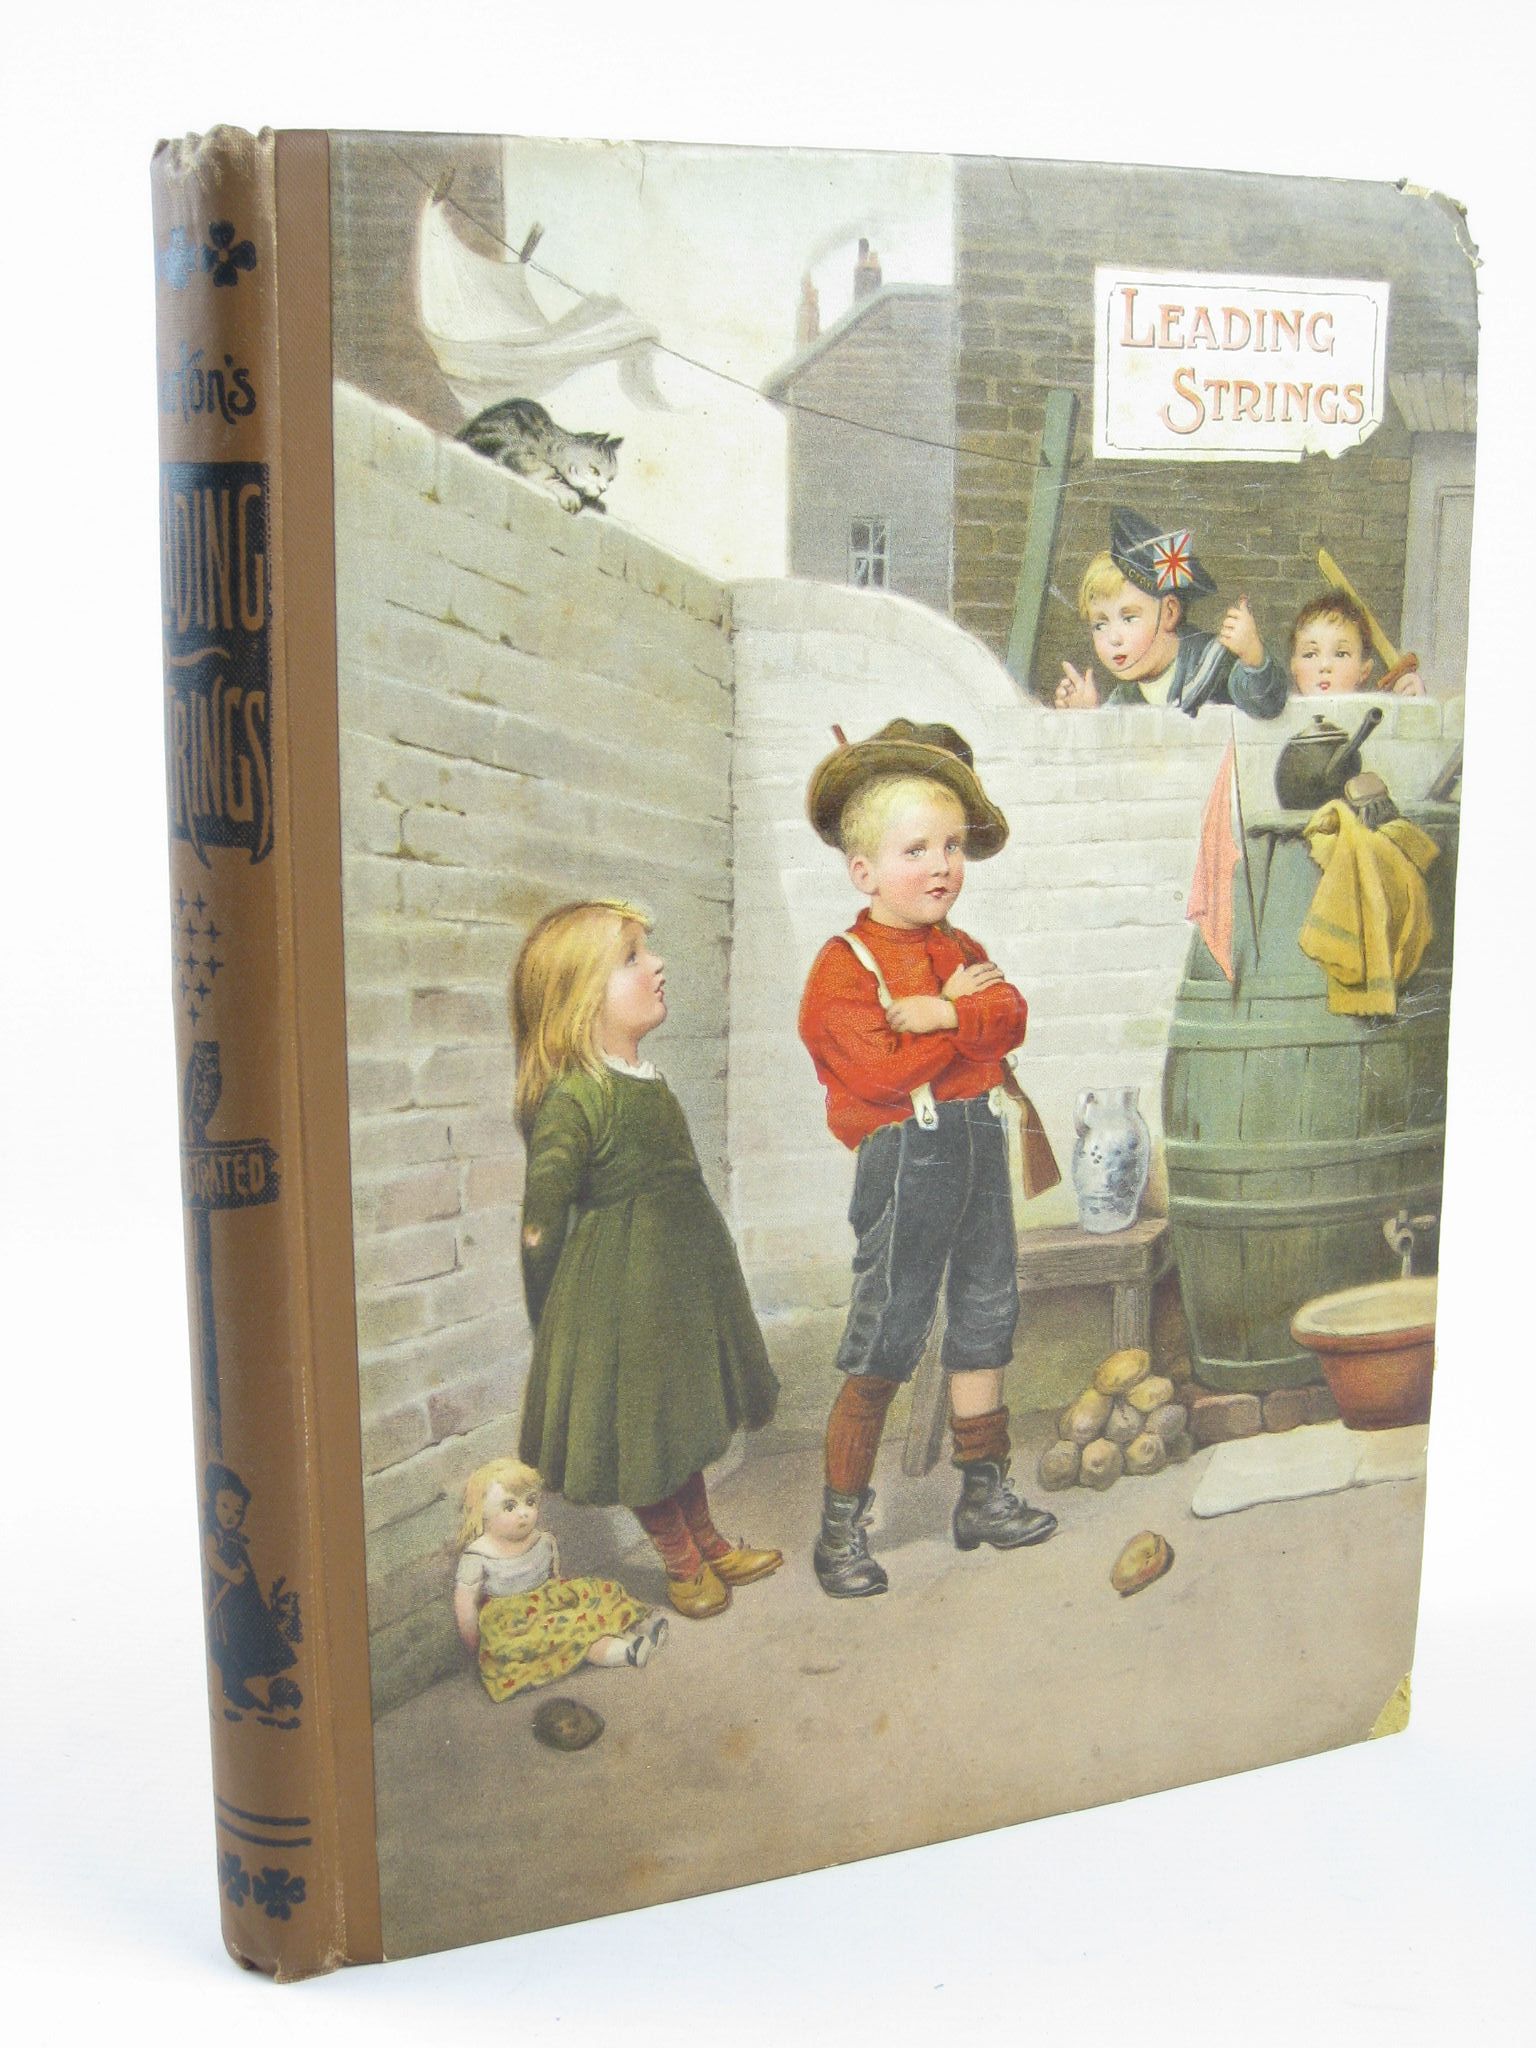 Photo of LEADING STRINGS published by Wells Gardner, Darton &amp; Co. (STOCK CODE: 1311258)  for sale by Stella & Rose's Books